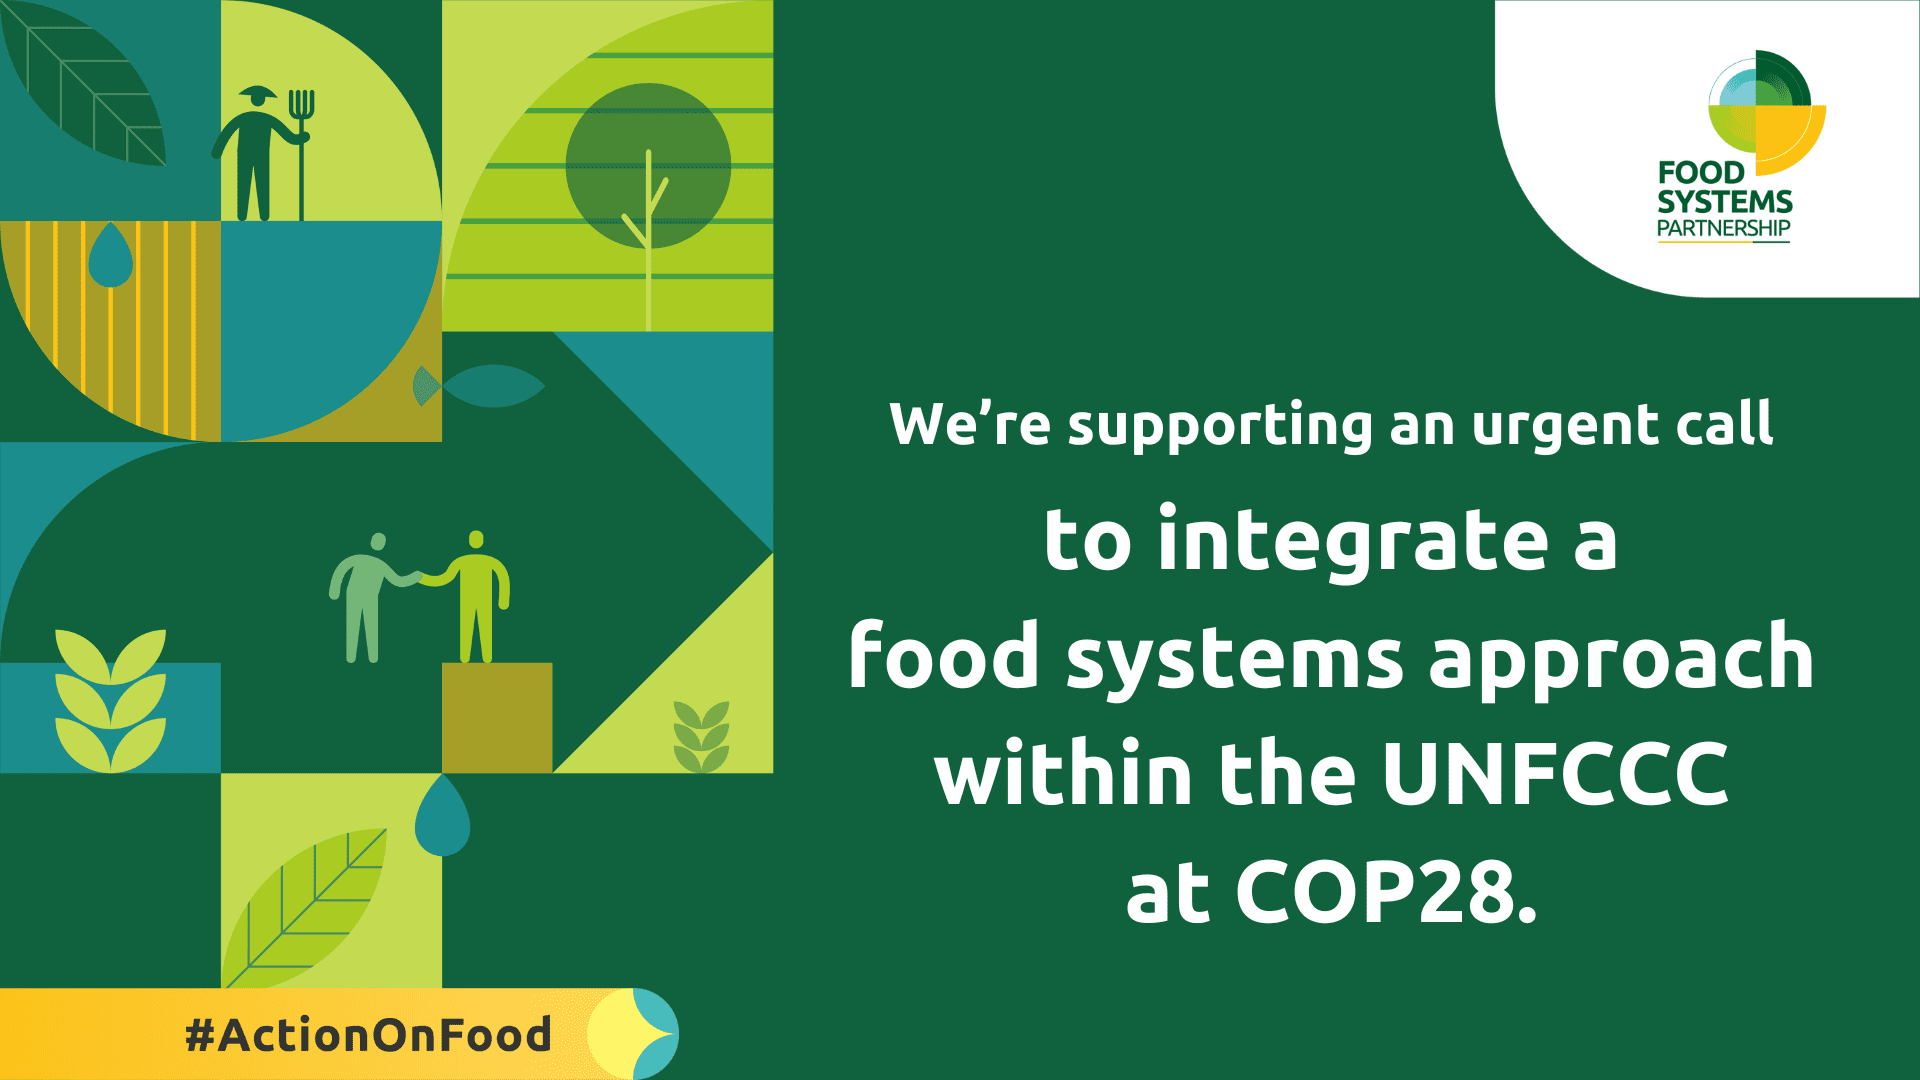 Poster for the food systems partnership - text = We're supporting an urgent call to integrate a food systems appraoch within the UNFCCC at COP28.